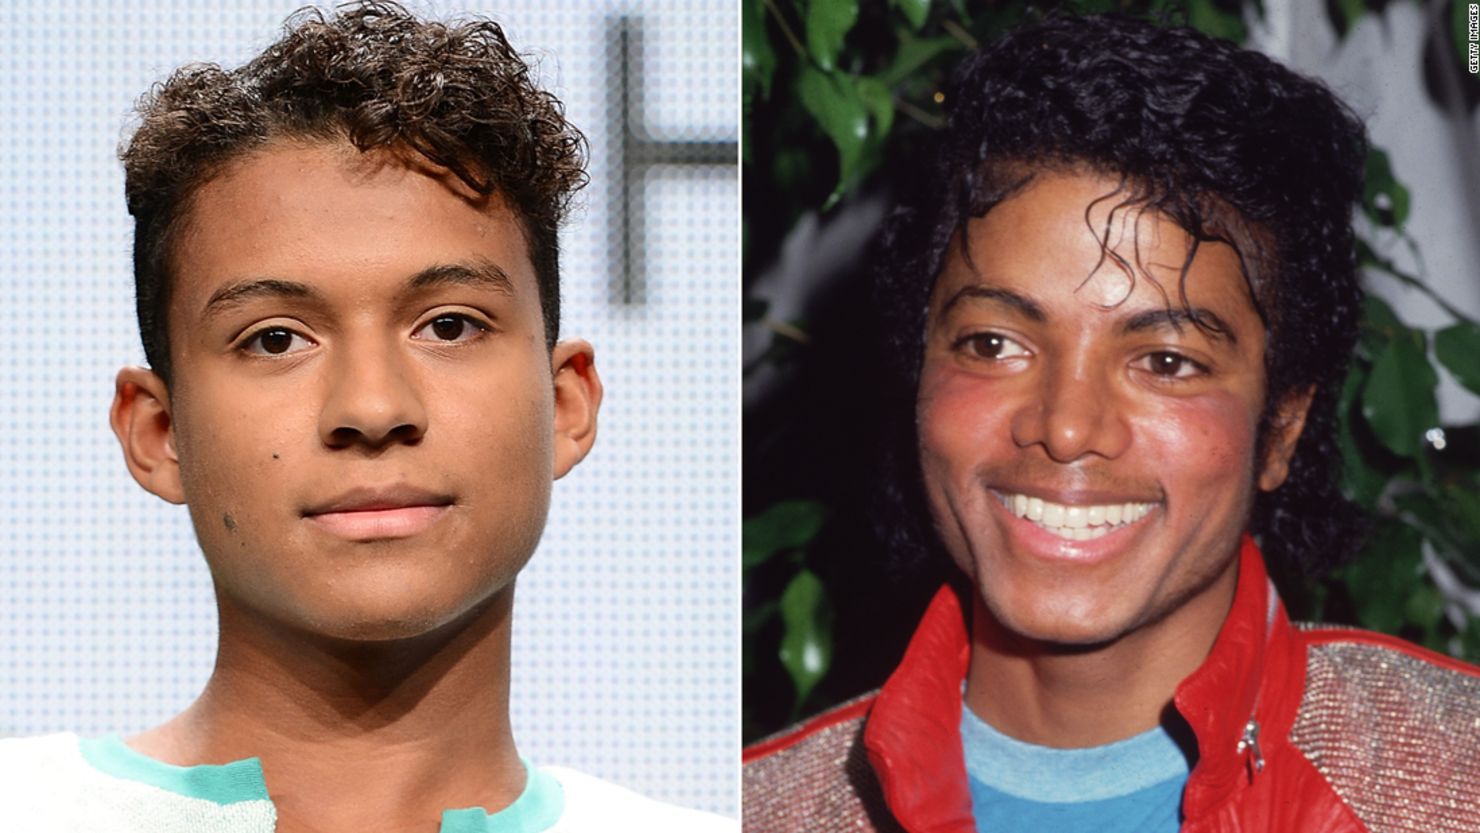 Jaafar Jackson, left, pictured at an event in Beverly Hills in 2014, has been cast to play his uncle, the late Michael Jackson, right, pictured in Los Angeles in 1983.